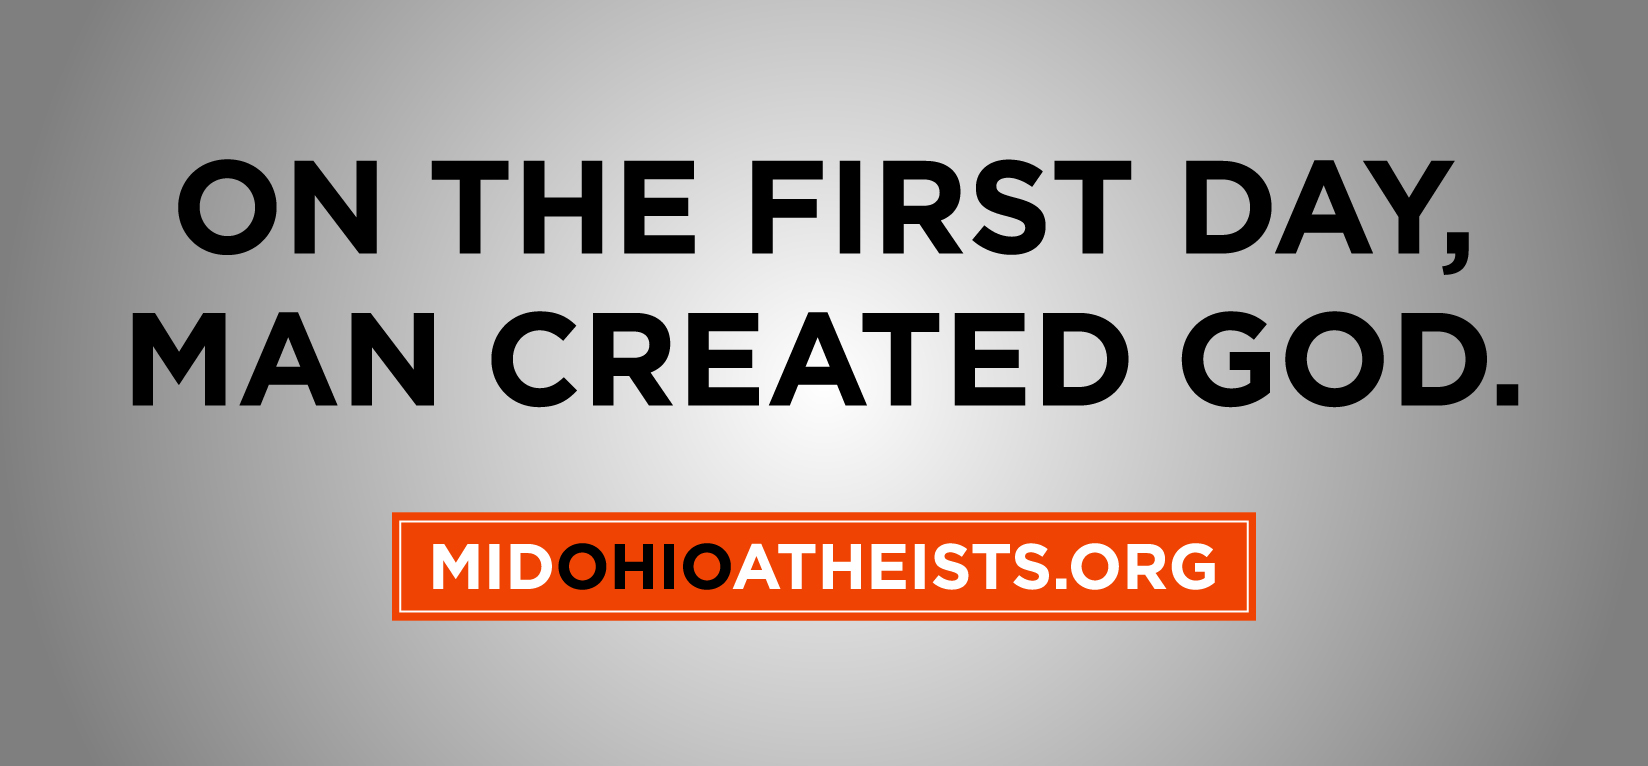 Atheist Billboard Comes Down in Ohio After a Christian Complains